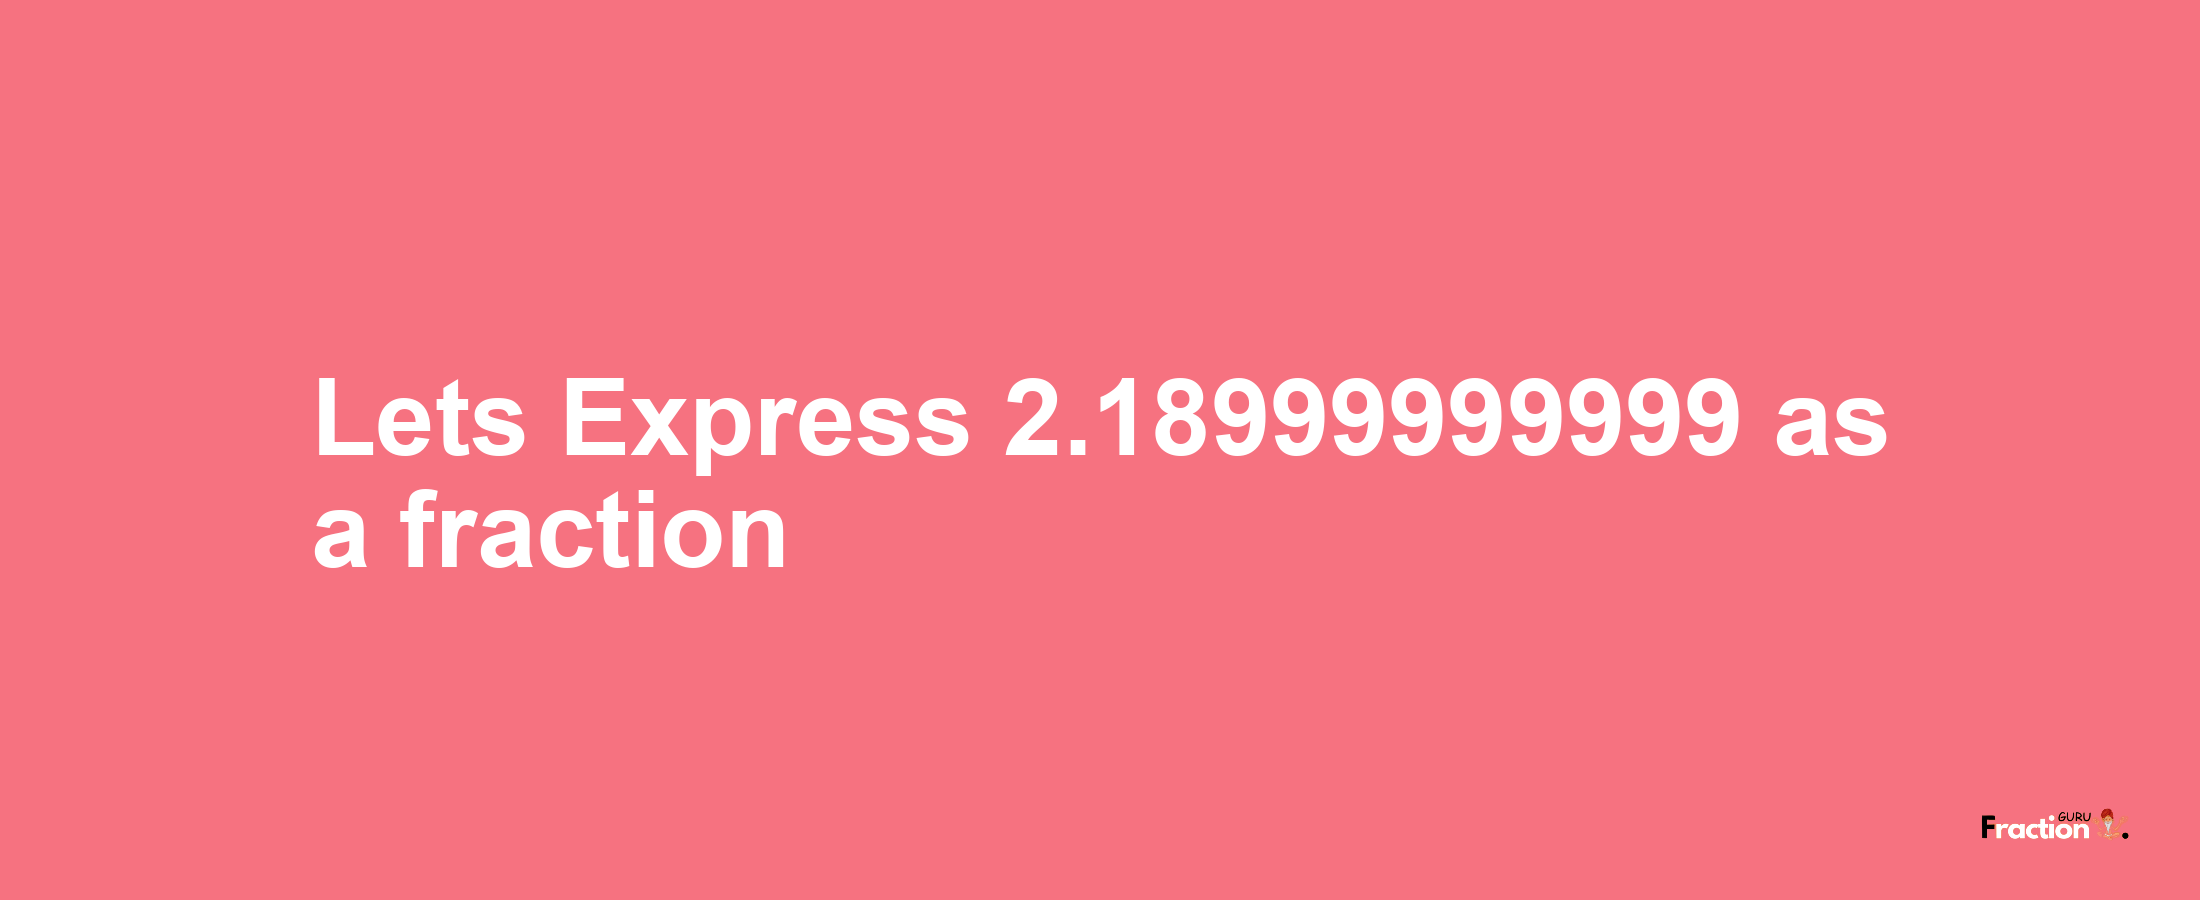 Lets Express 2.18999999999 as afraction